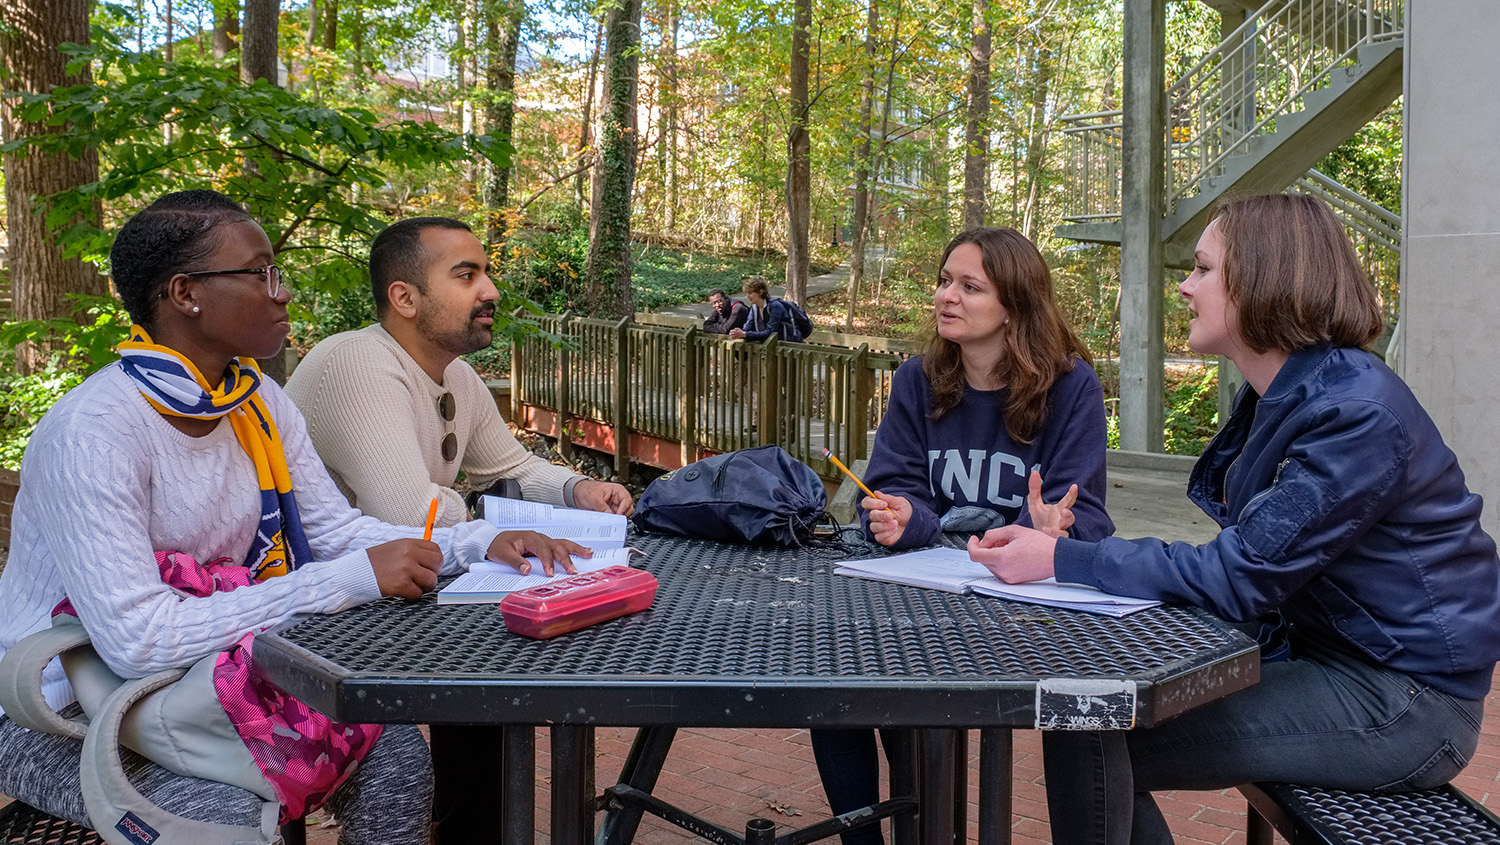 Four UNCG students sitting around outdoor picnic table with notebooks